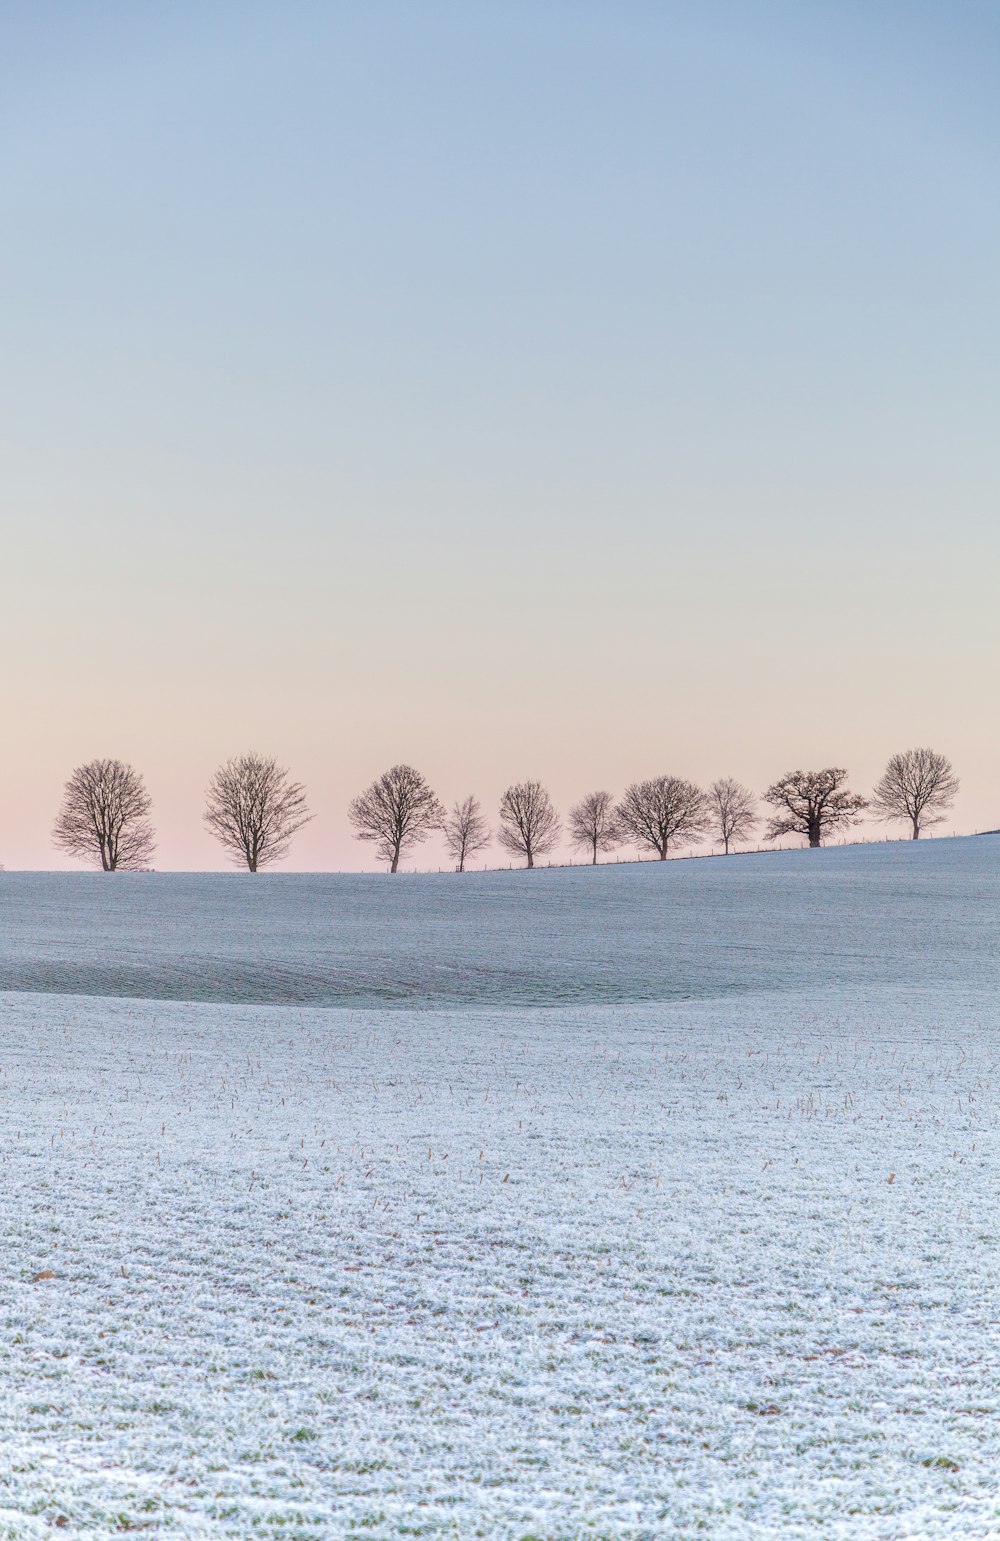 a group of trees standing in the middle of a snow covered field